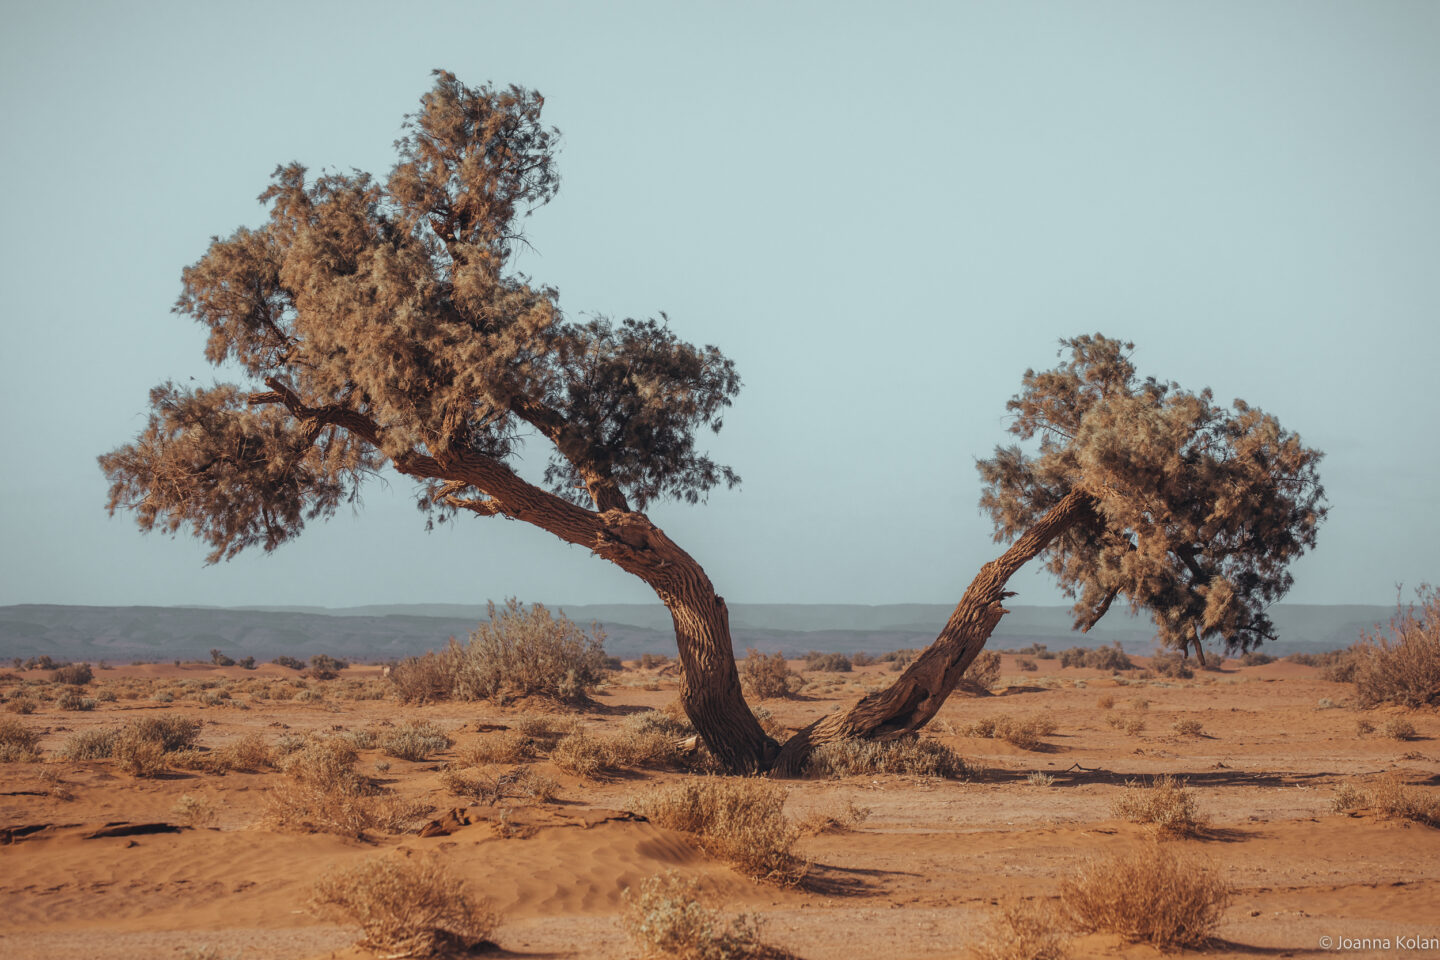 A lonely tree in the Sahara Desert, Morocco